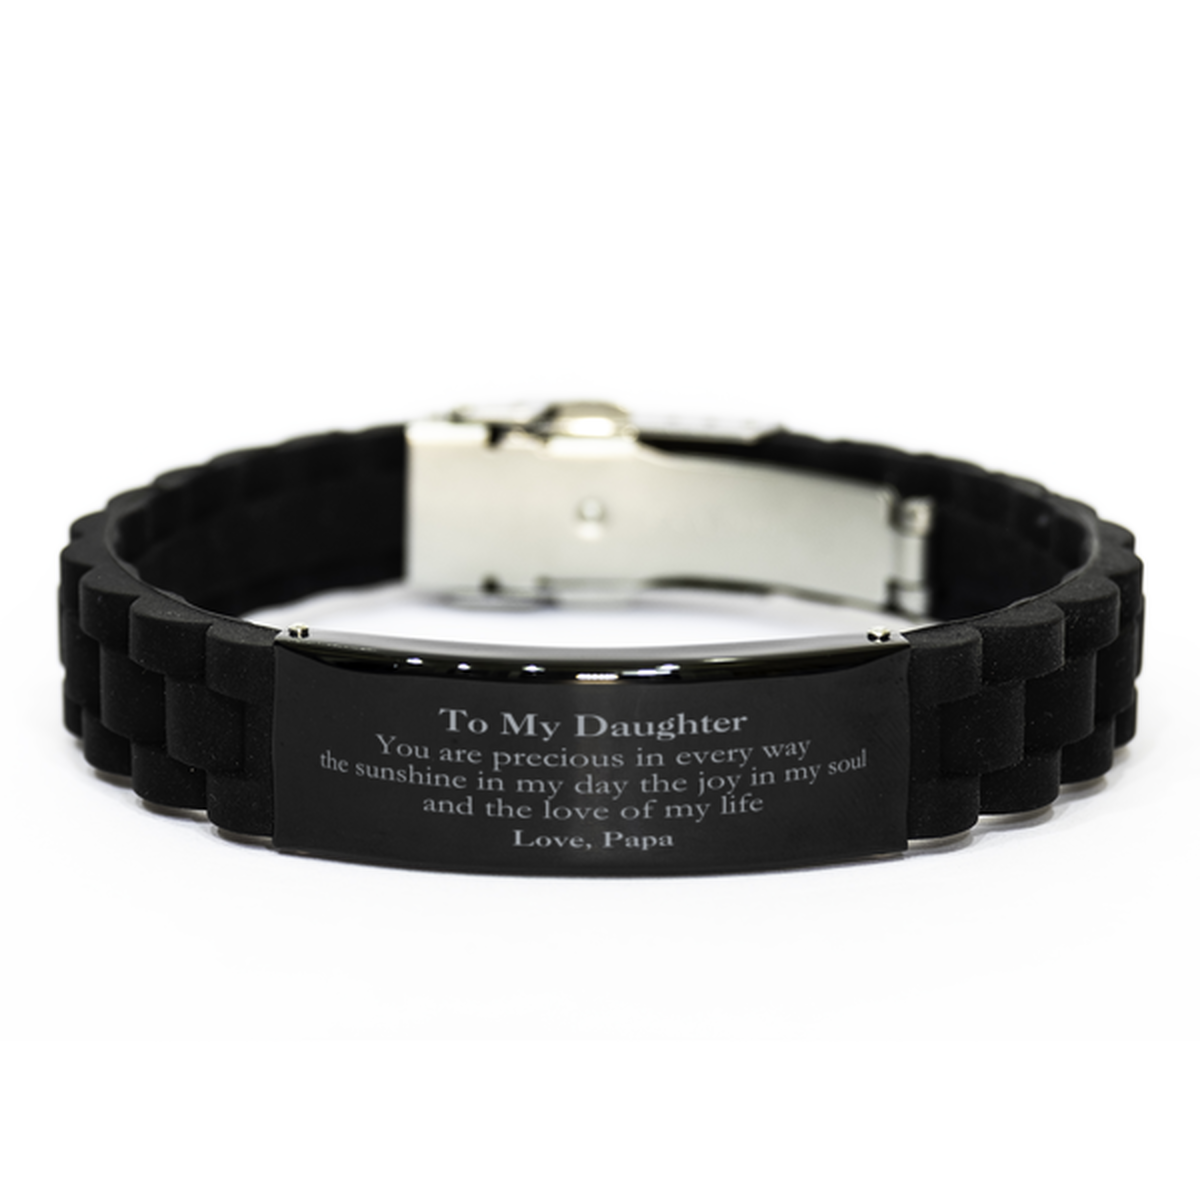 Graduation Gifts for Daughter Black Glidelock Clasp Bracelet Present from Papa, Christmas Daughter Birthday Gifts Daughter You are precious in every way the sunshine in my day. Love, Papa